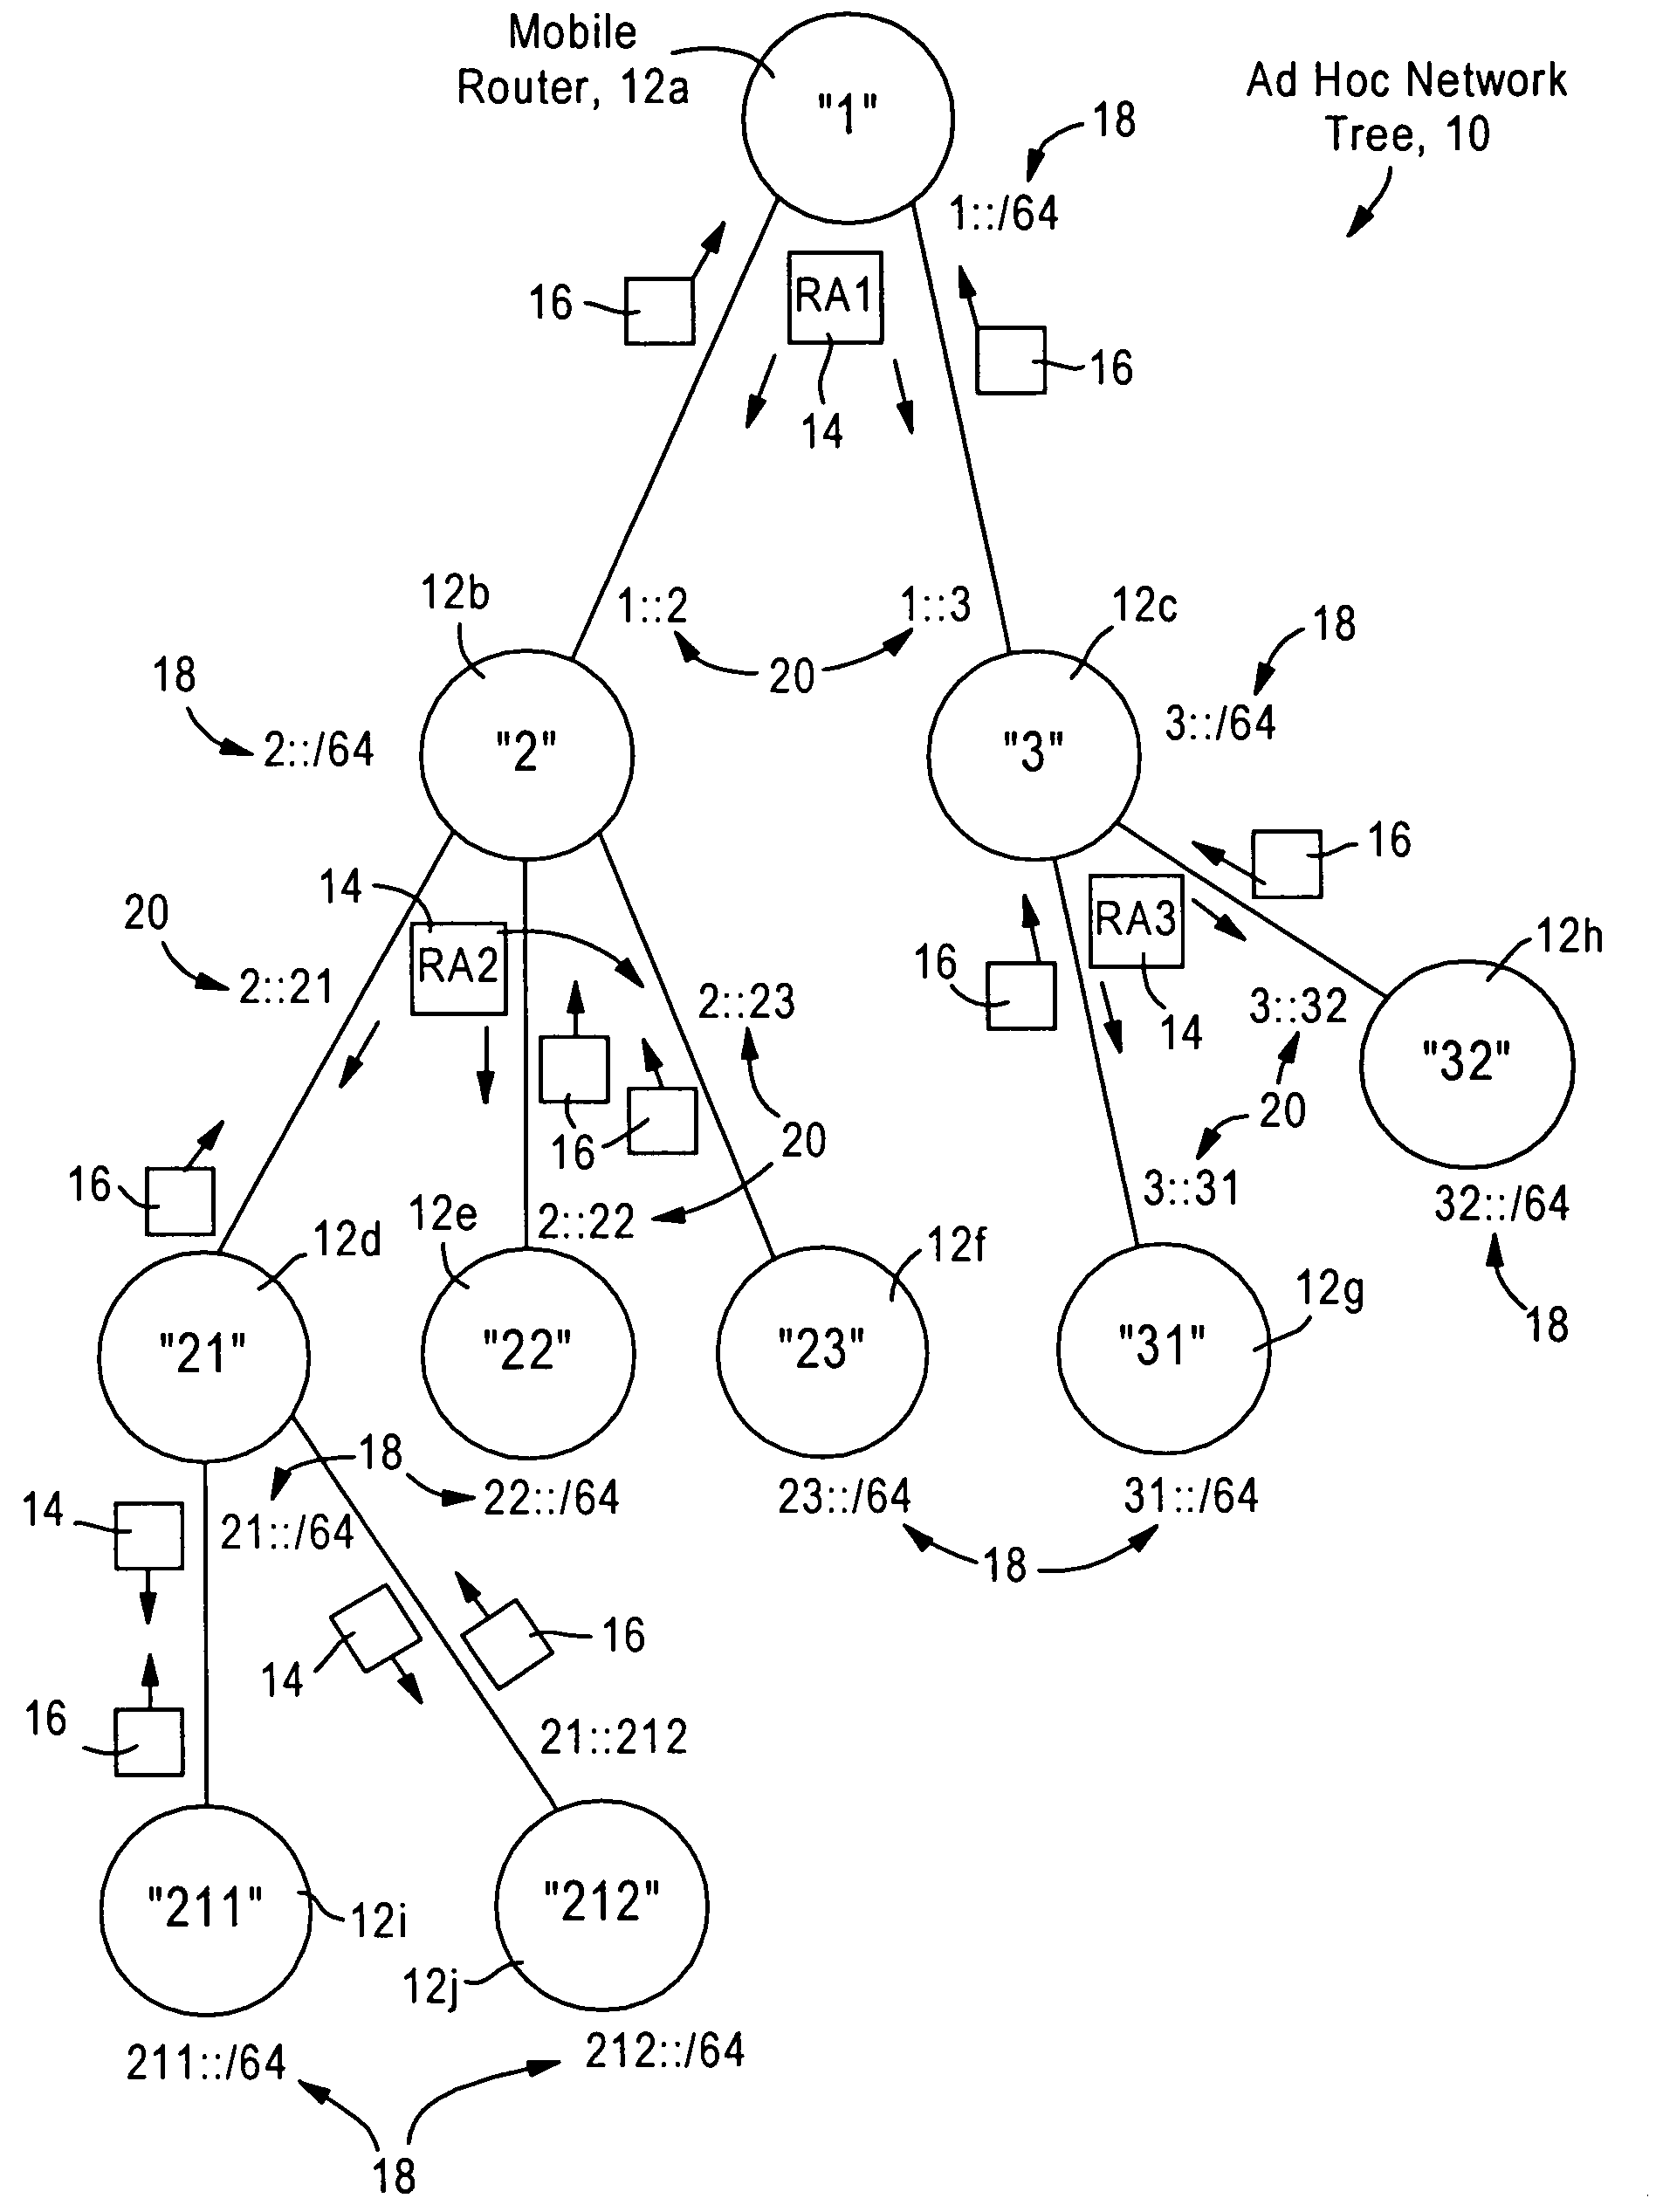 Arrangement for providing network prefix information from attached mobile routers to a clusterhead in a tree-based ad hoc mobile network